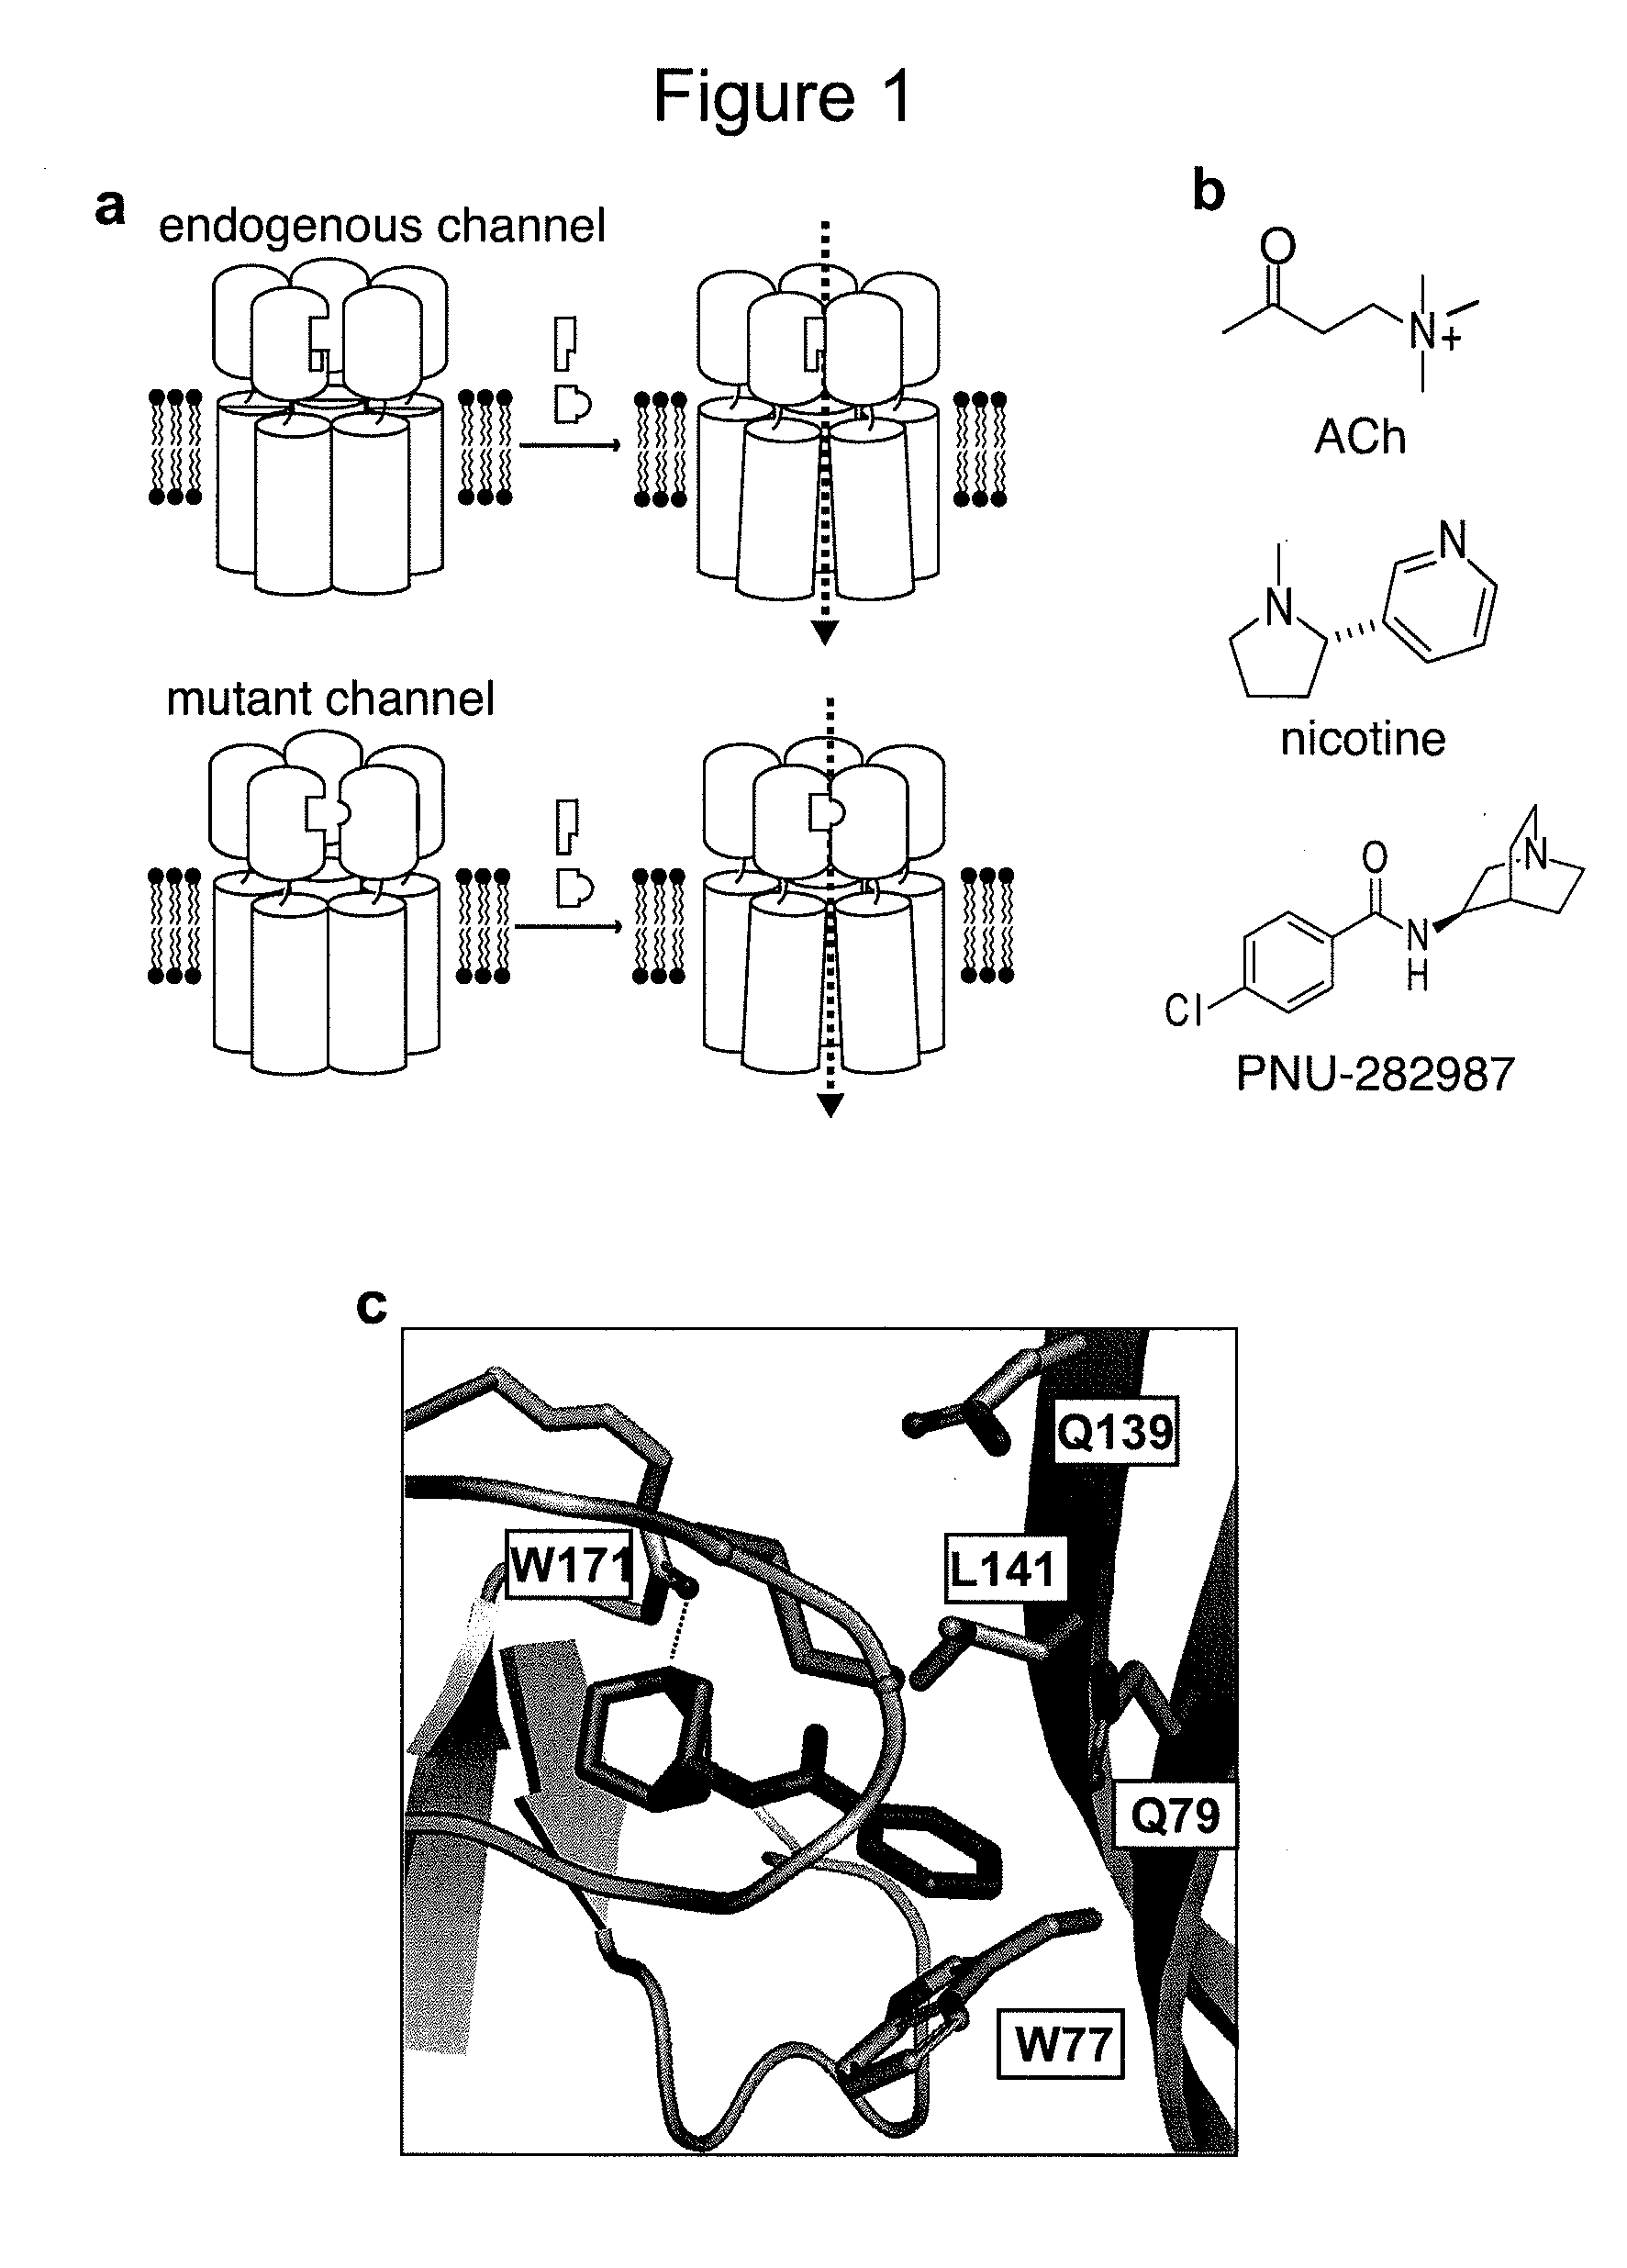 Novel chimeric ligand-gated ion channels and methods of use thereof